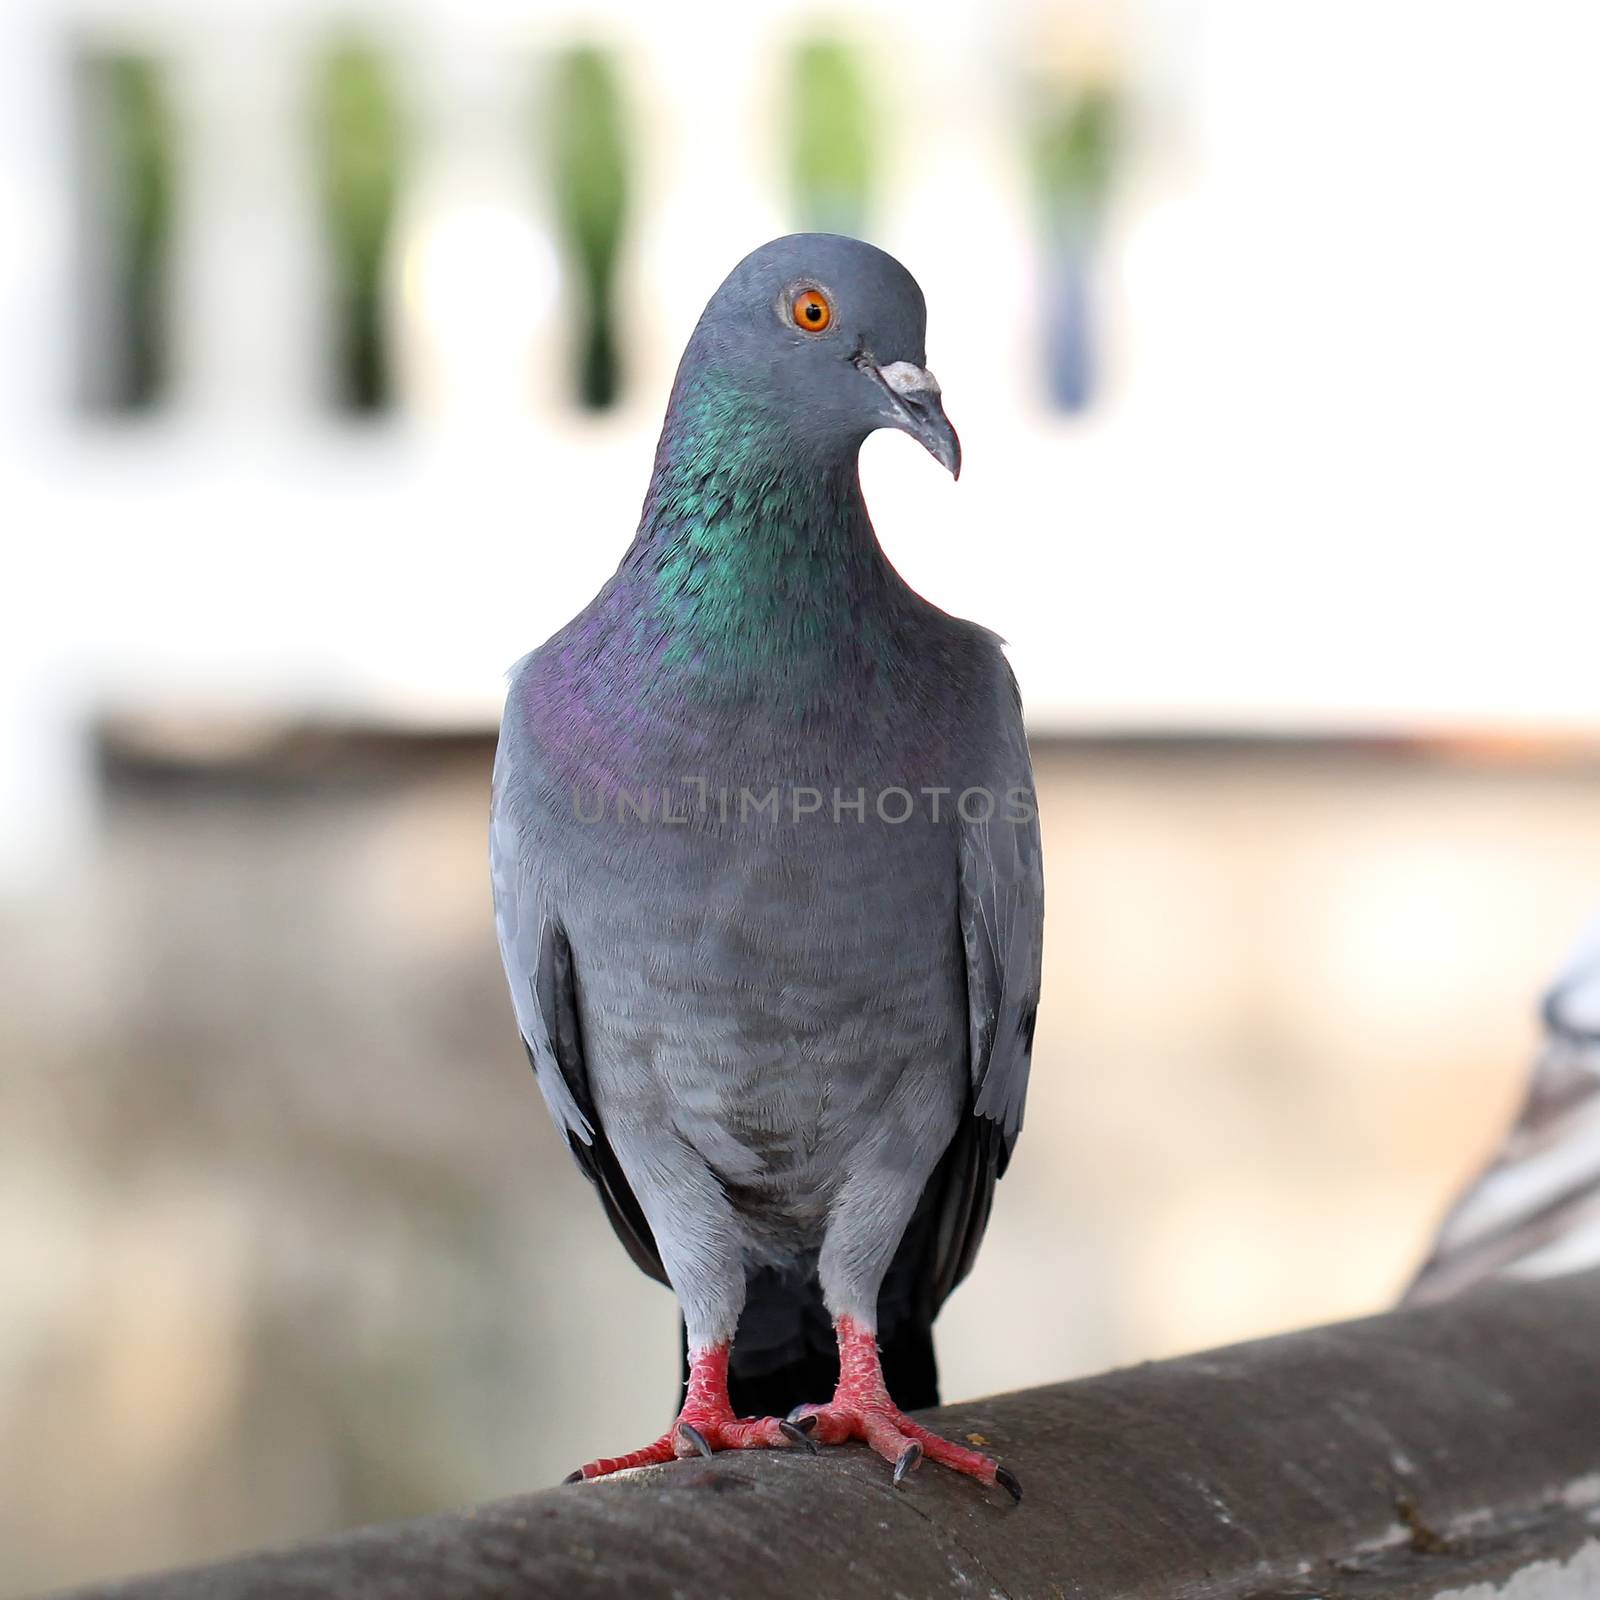 Closeup of the freedom pigeon